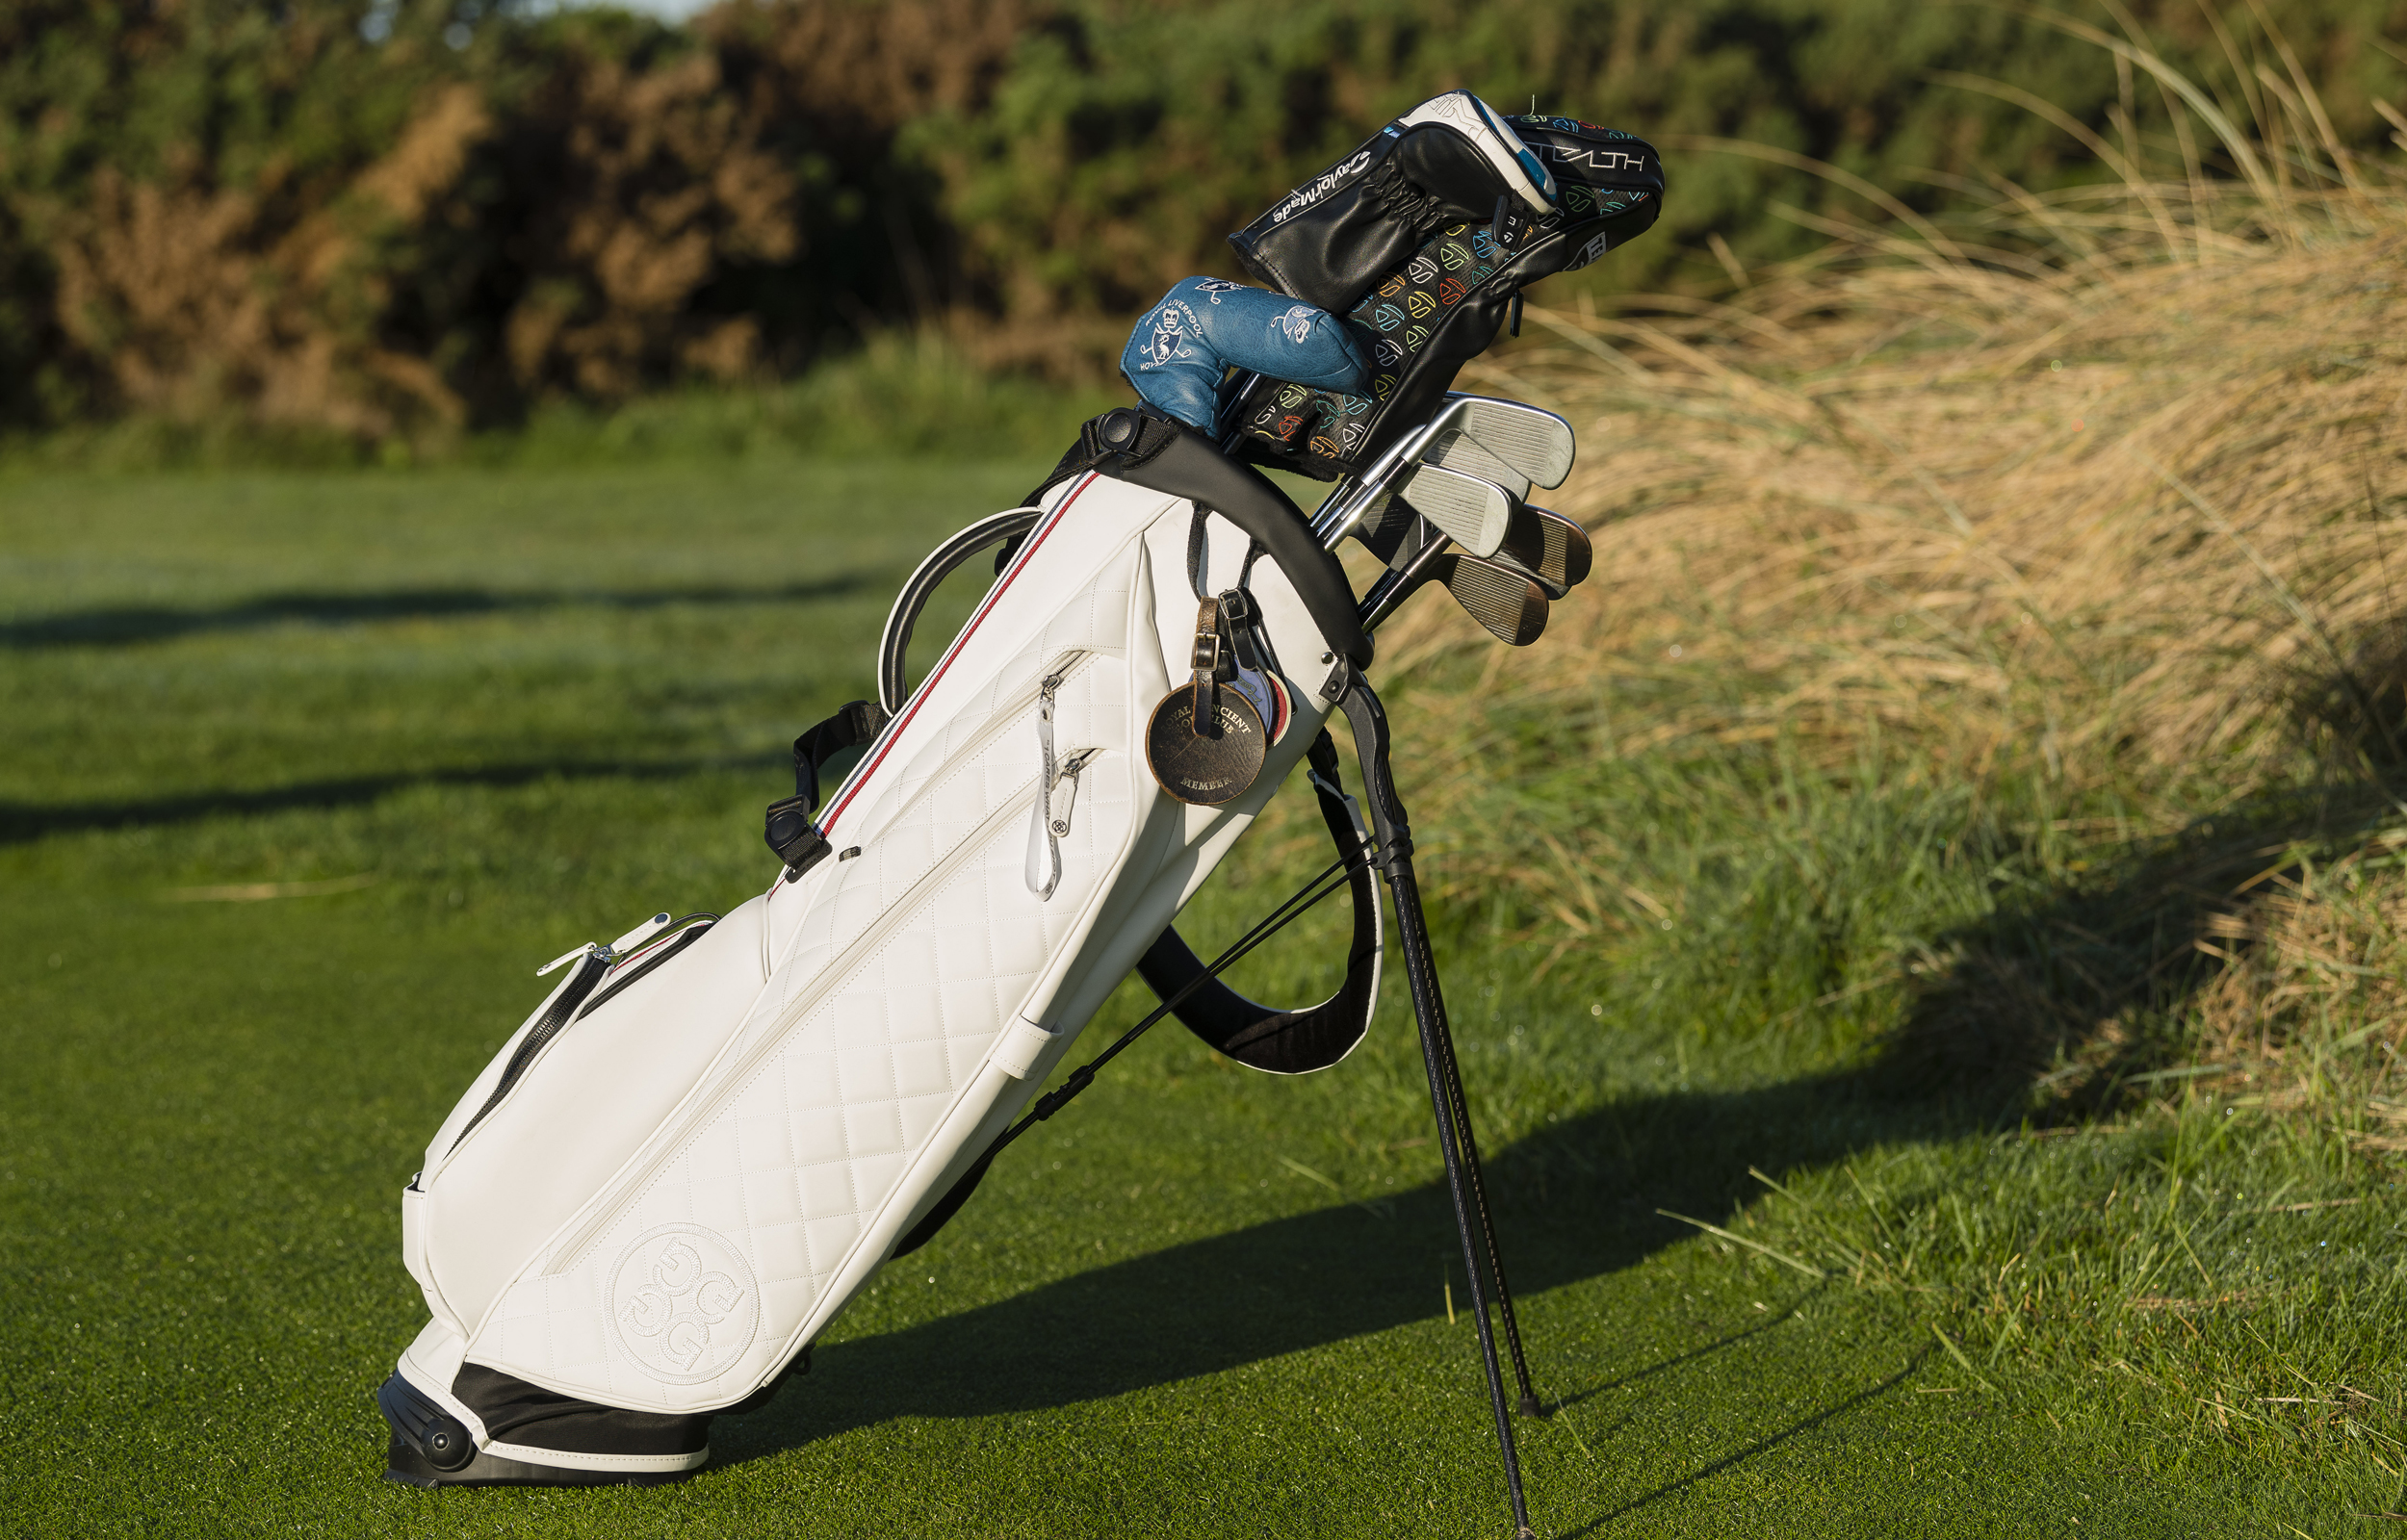 Vessel Golf Bag Review - VLX Stand Bag - WATCH THIS BEFORE BUYING